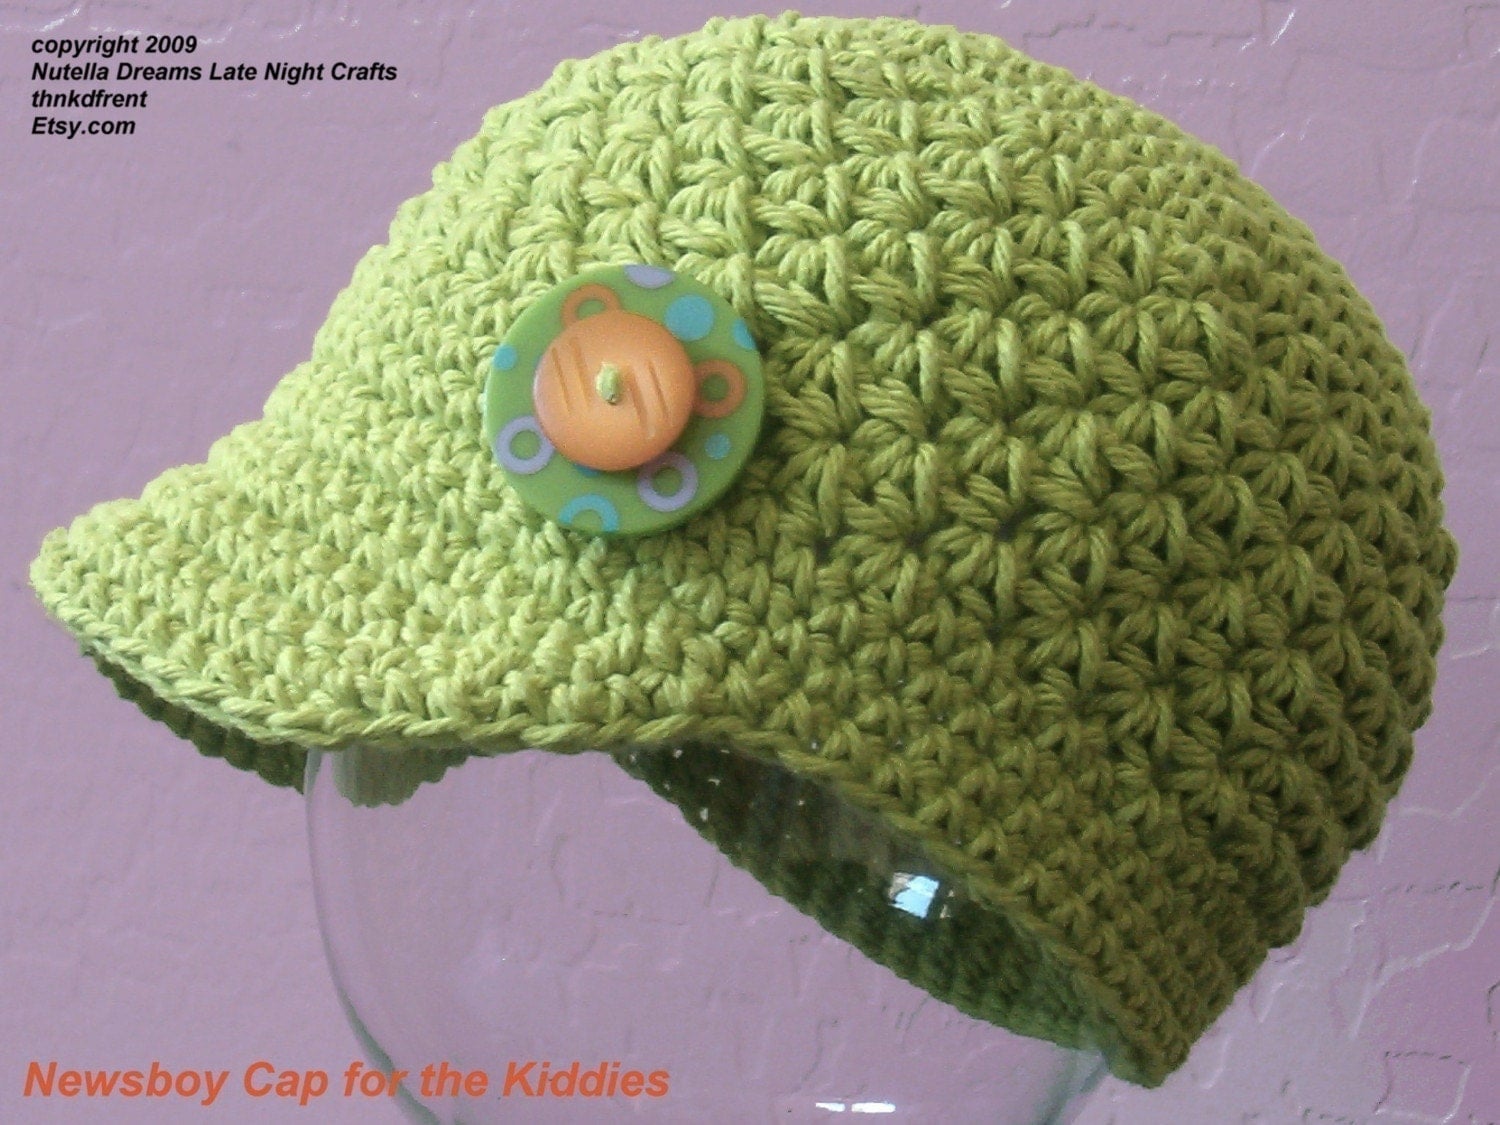 FREE HAT CROCHET PATTERNS FROM OUR FREE CROCHET PATTERNS